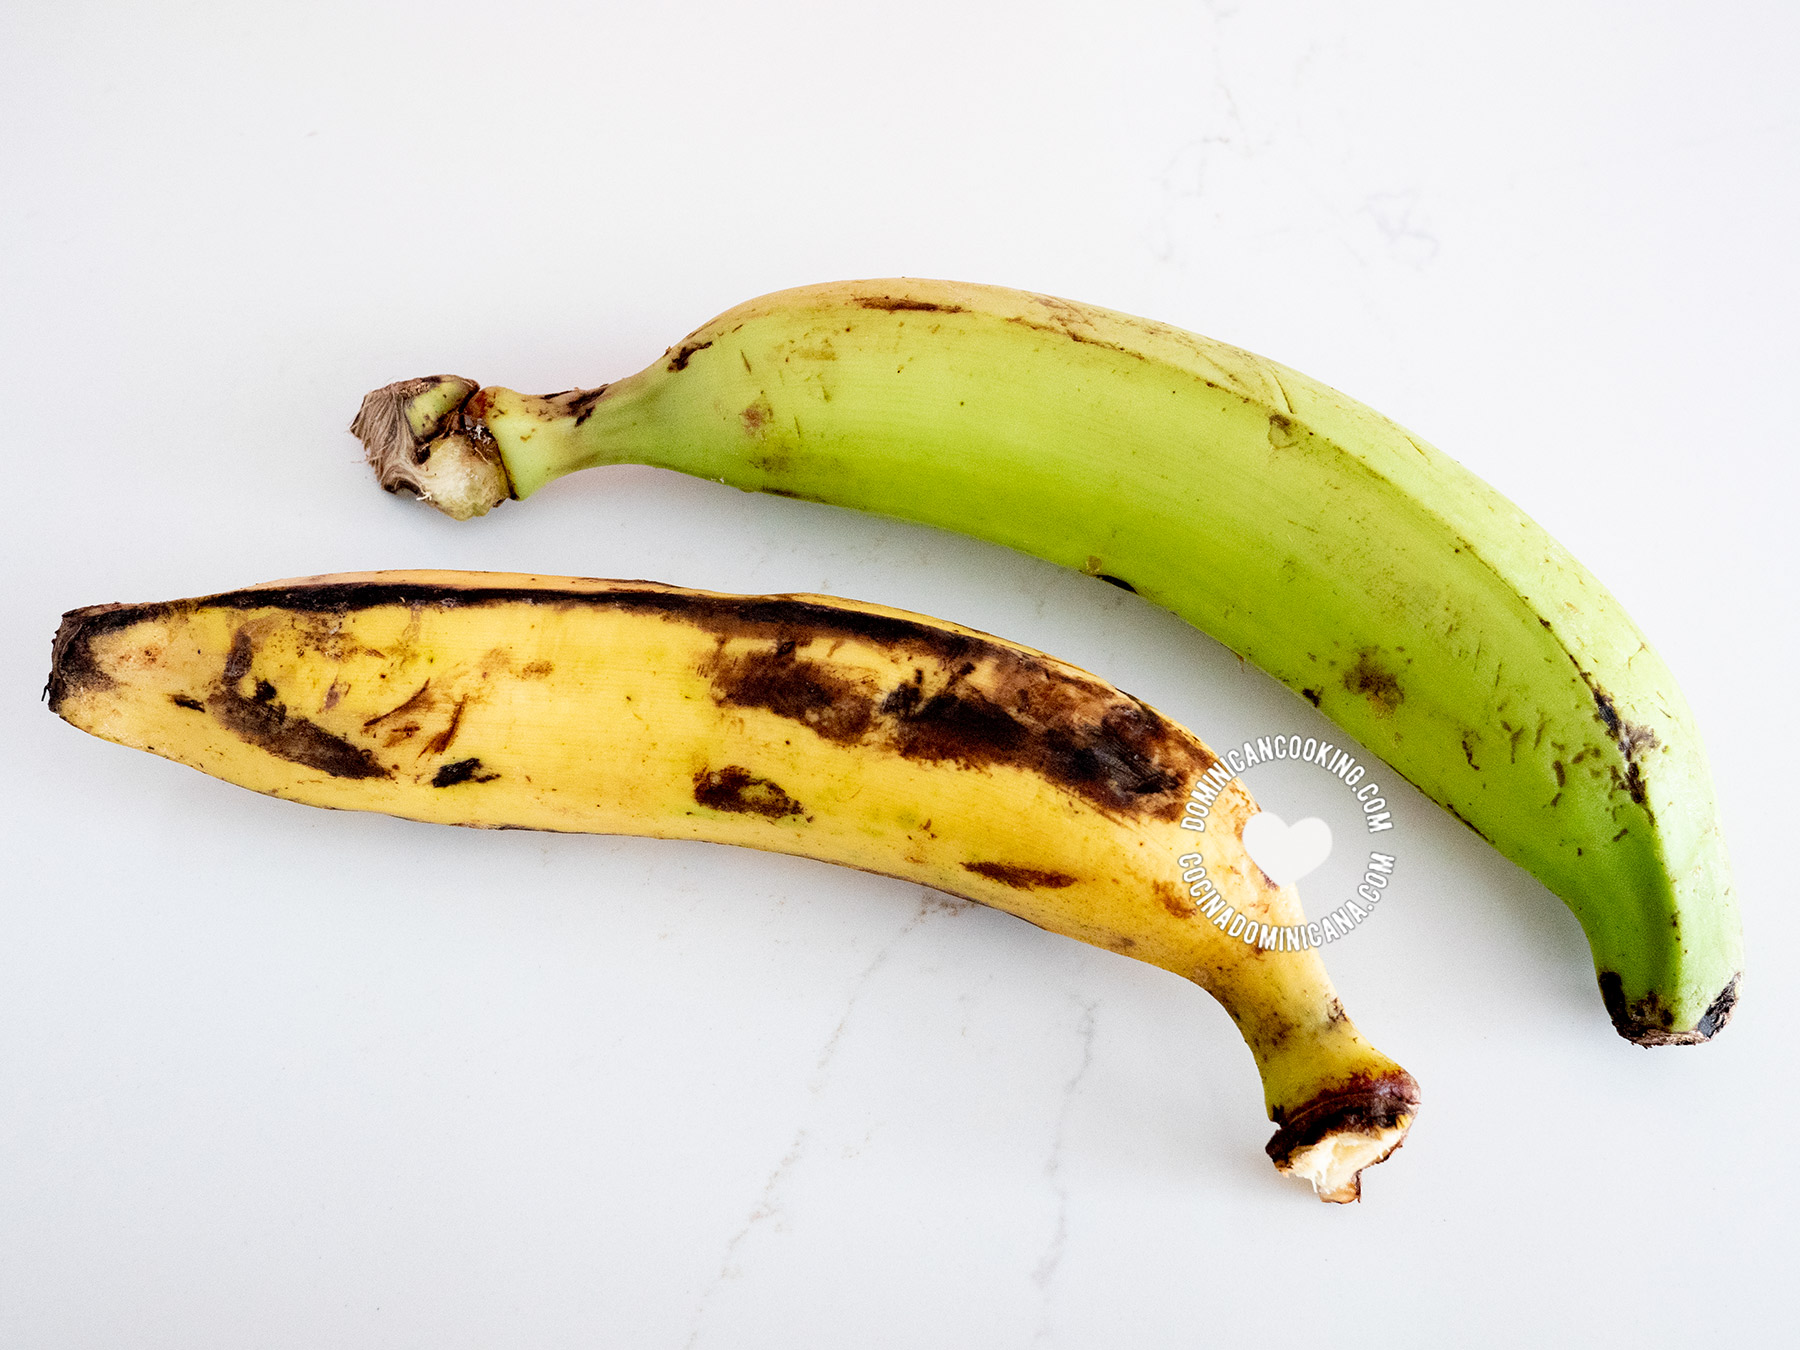 Green (unripe) and yellow (ripe) plantains